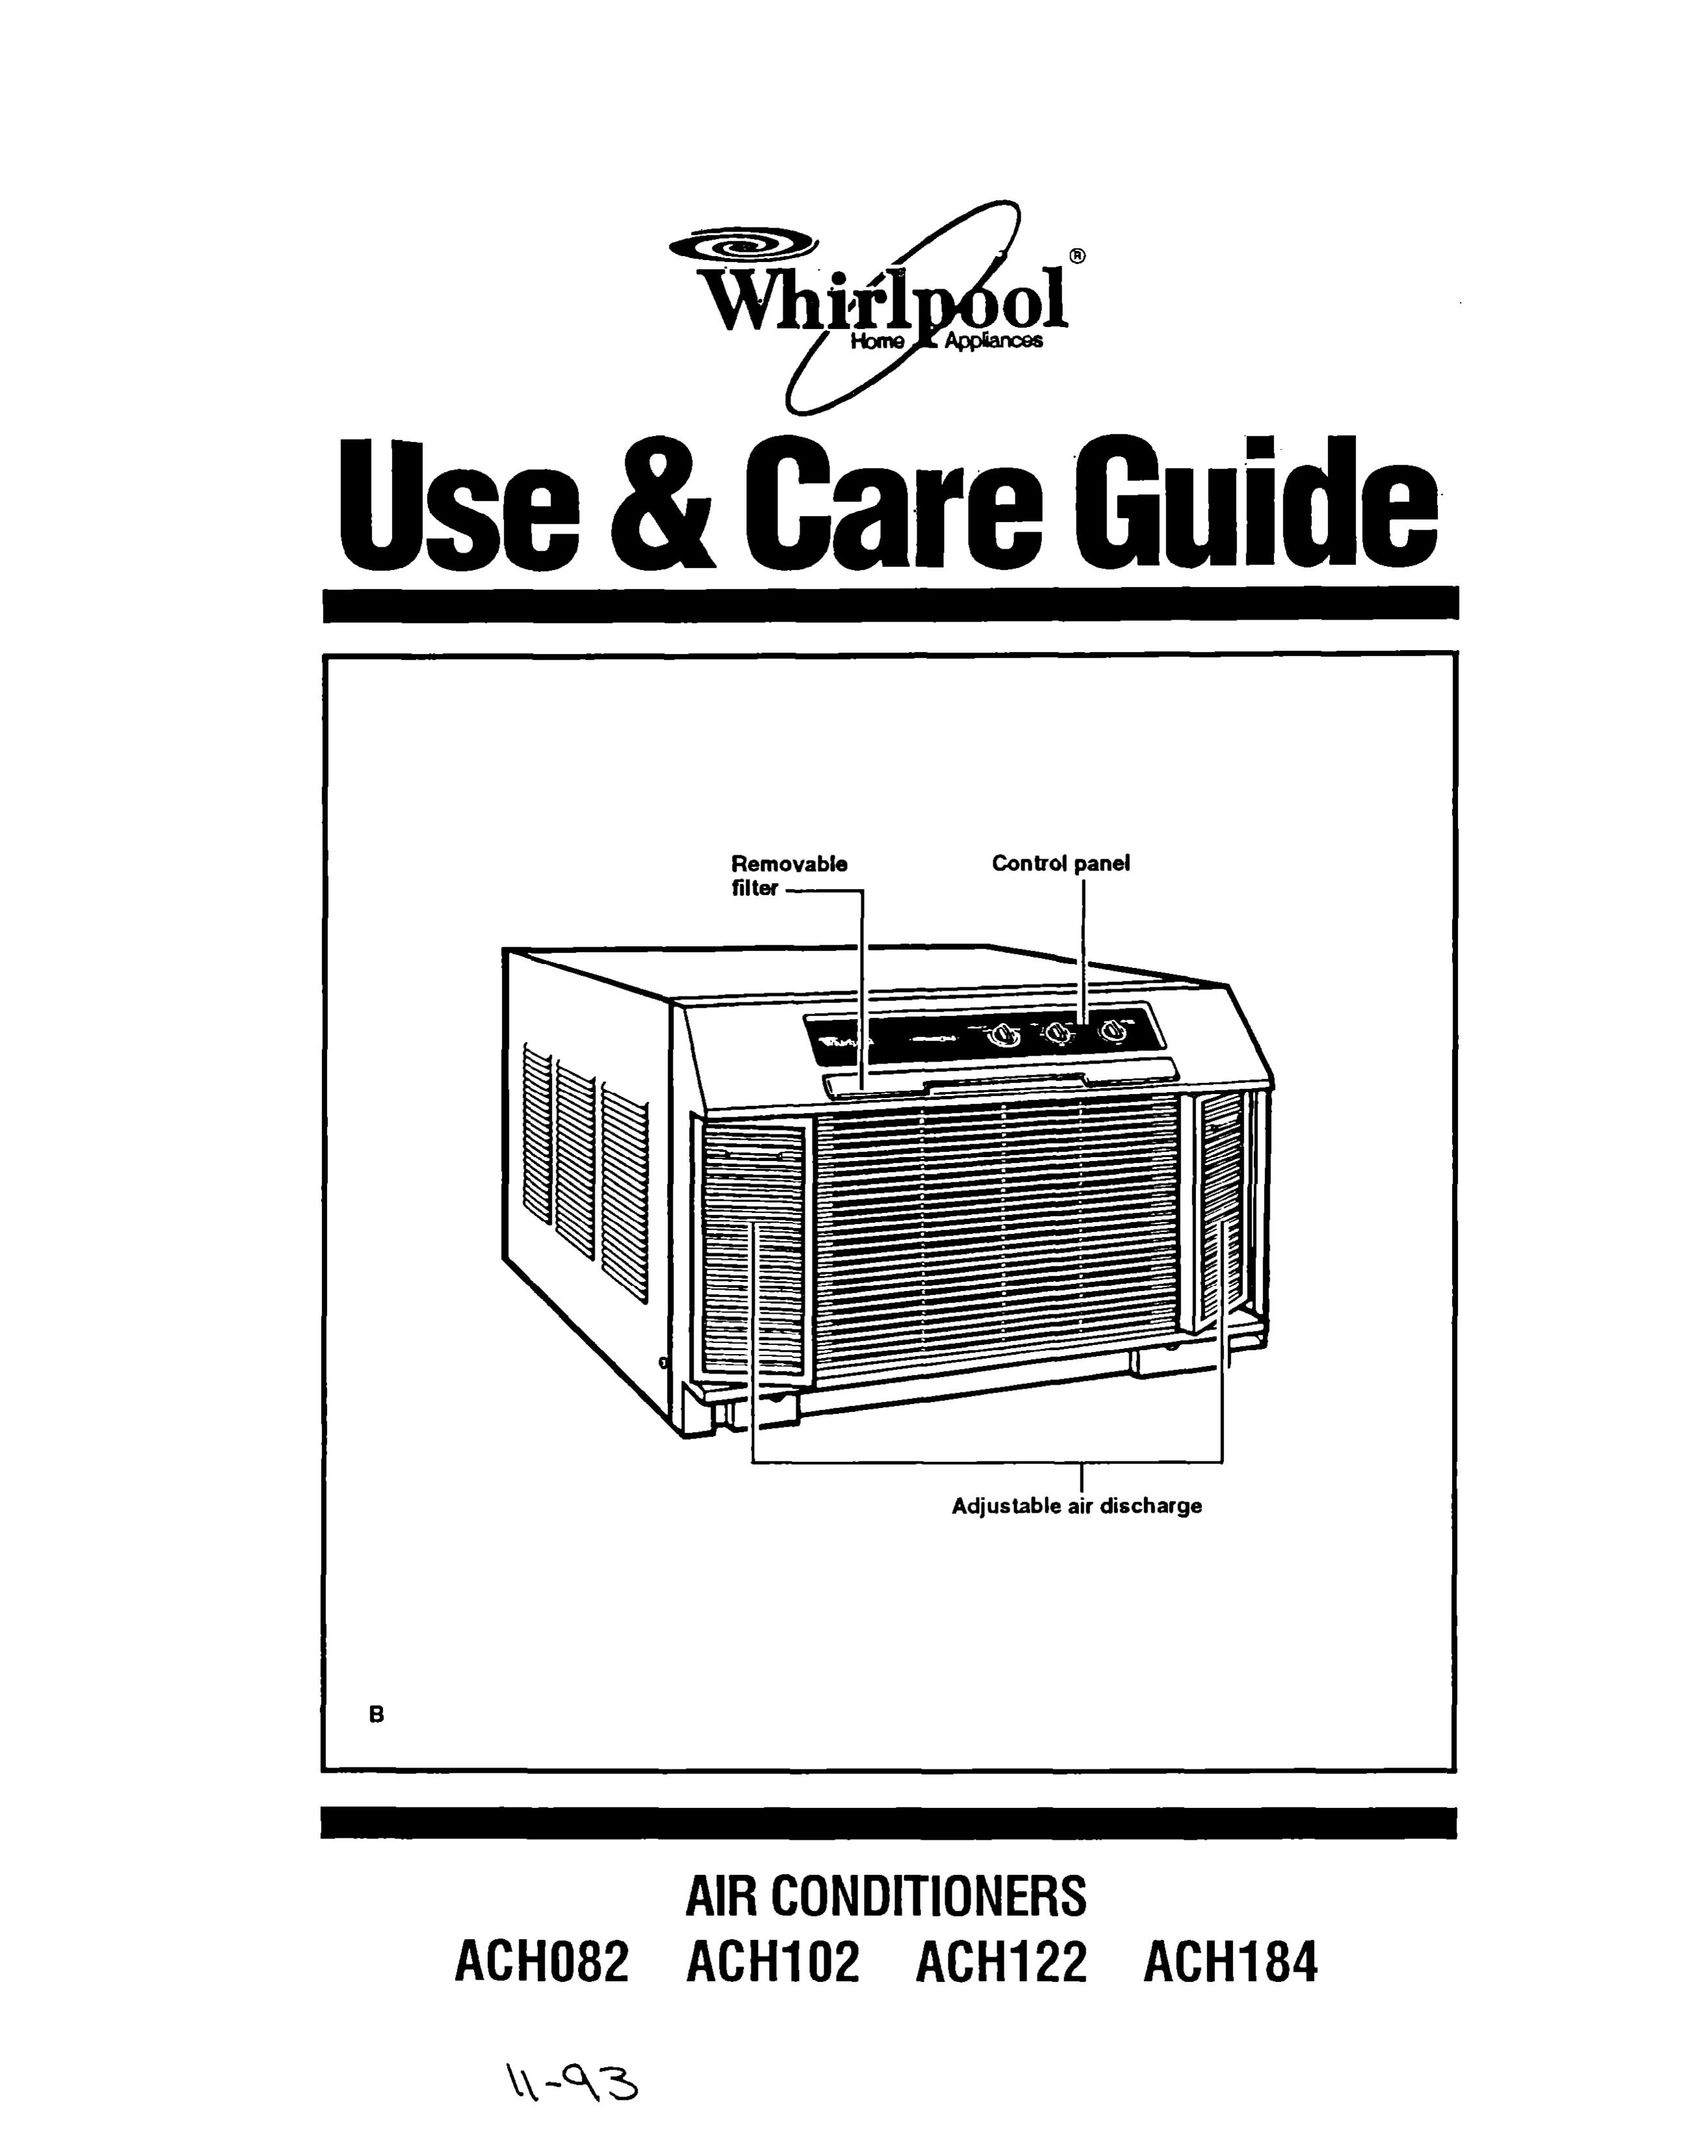 Whirlpool ACH184 Air Conditioner User Manual